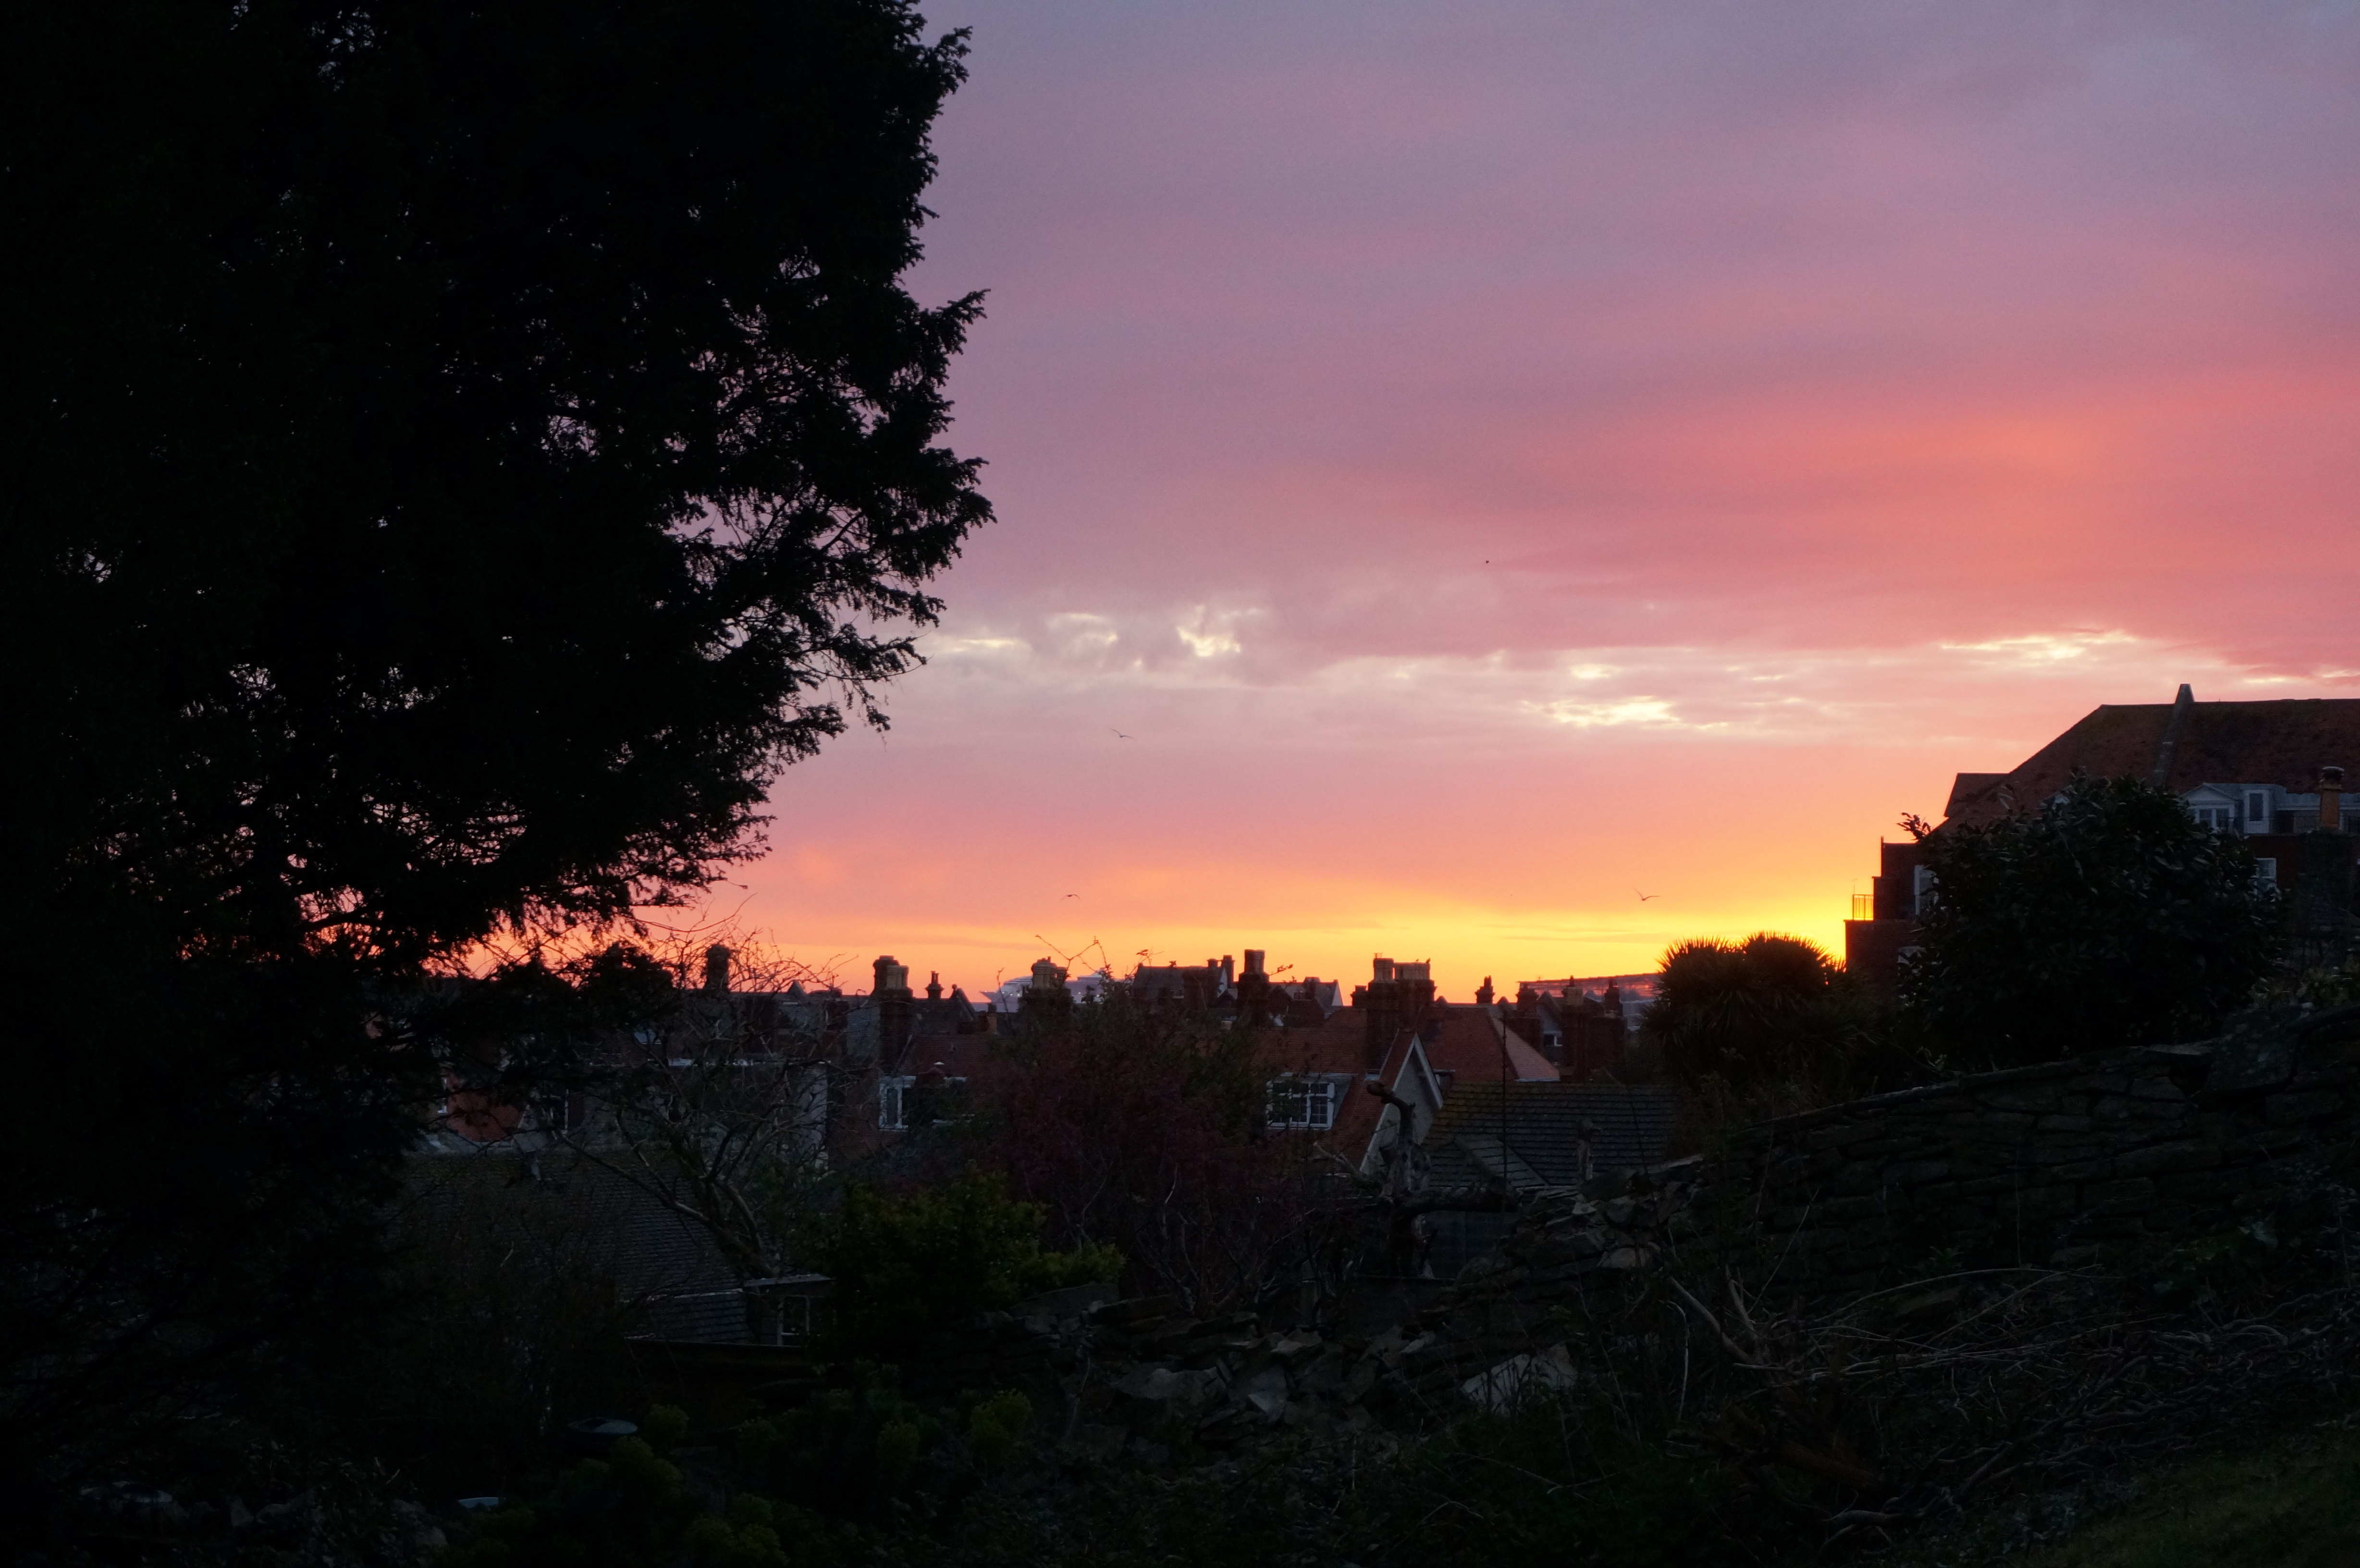 6.20 a.m. from the rectory garden yesterday